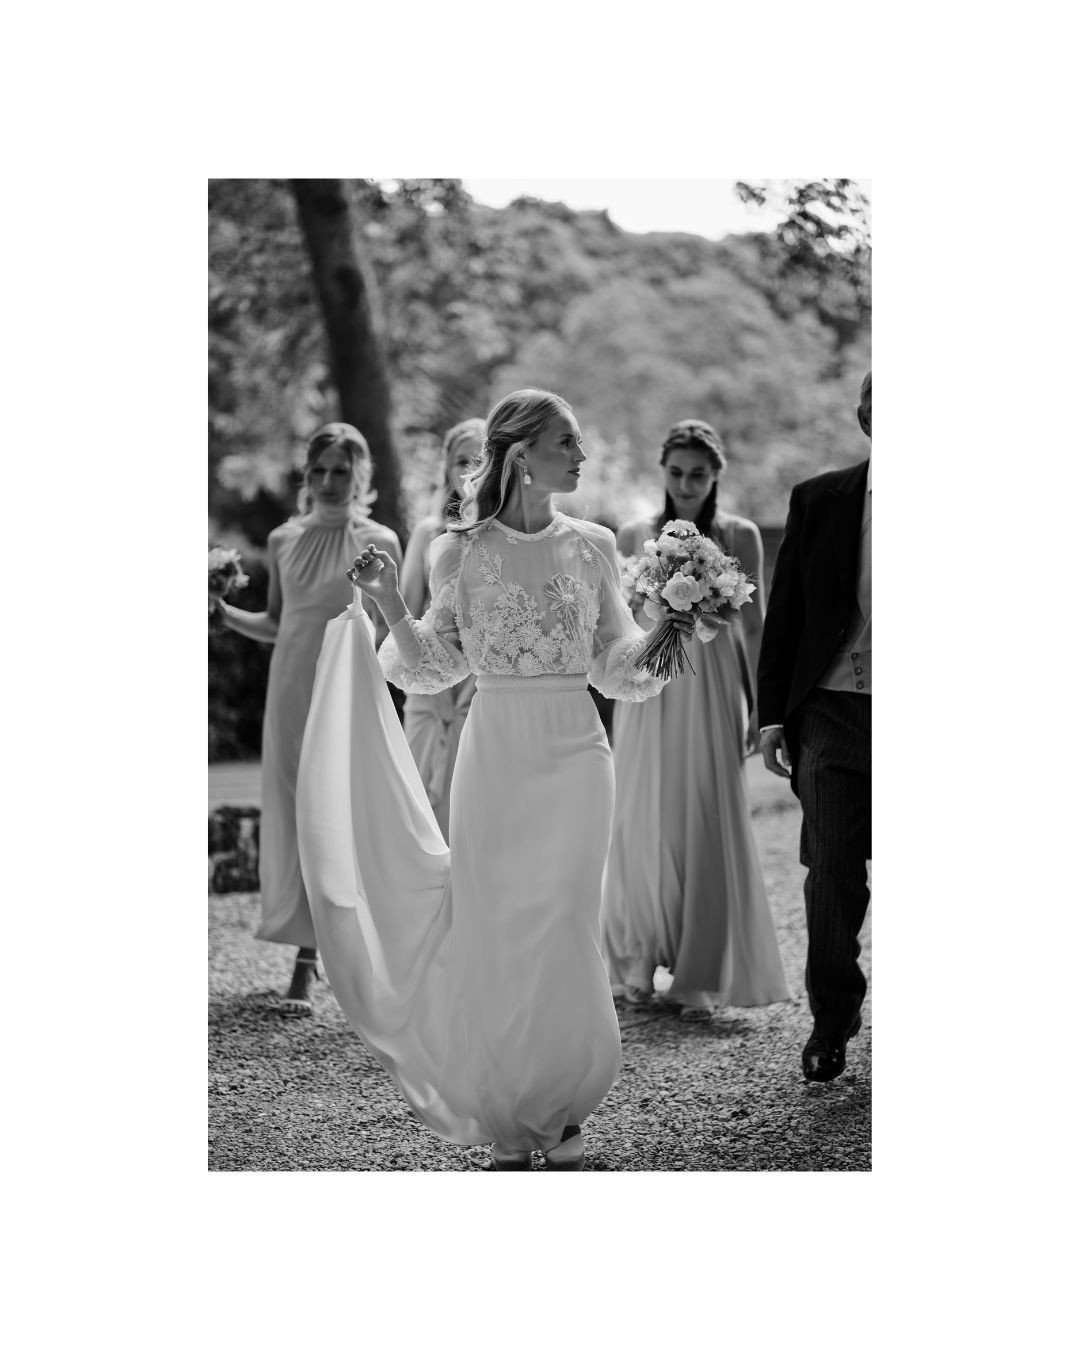 THE WALK⁠
.⁠
There's something magical about 'The Walk' on a wedding day - it's a short adventure filled with anticipation and love, shared with the ones closest to you.⁠
.⁠
Whether it's to the ceremony, reception, or a picturesque location for portr